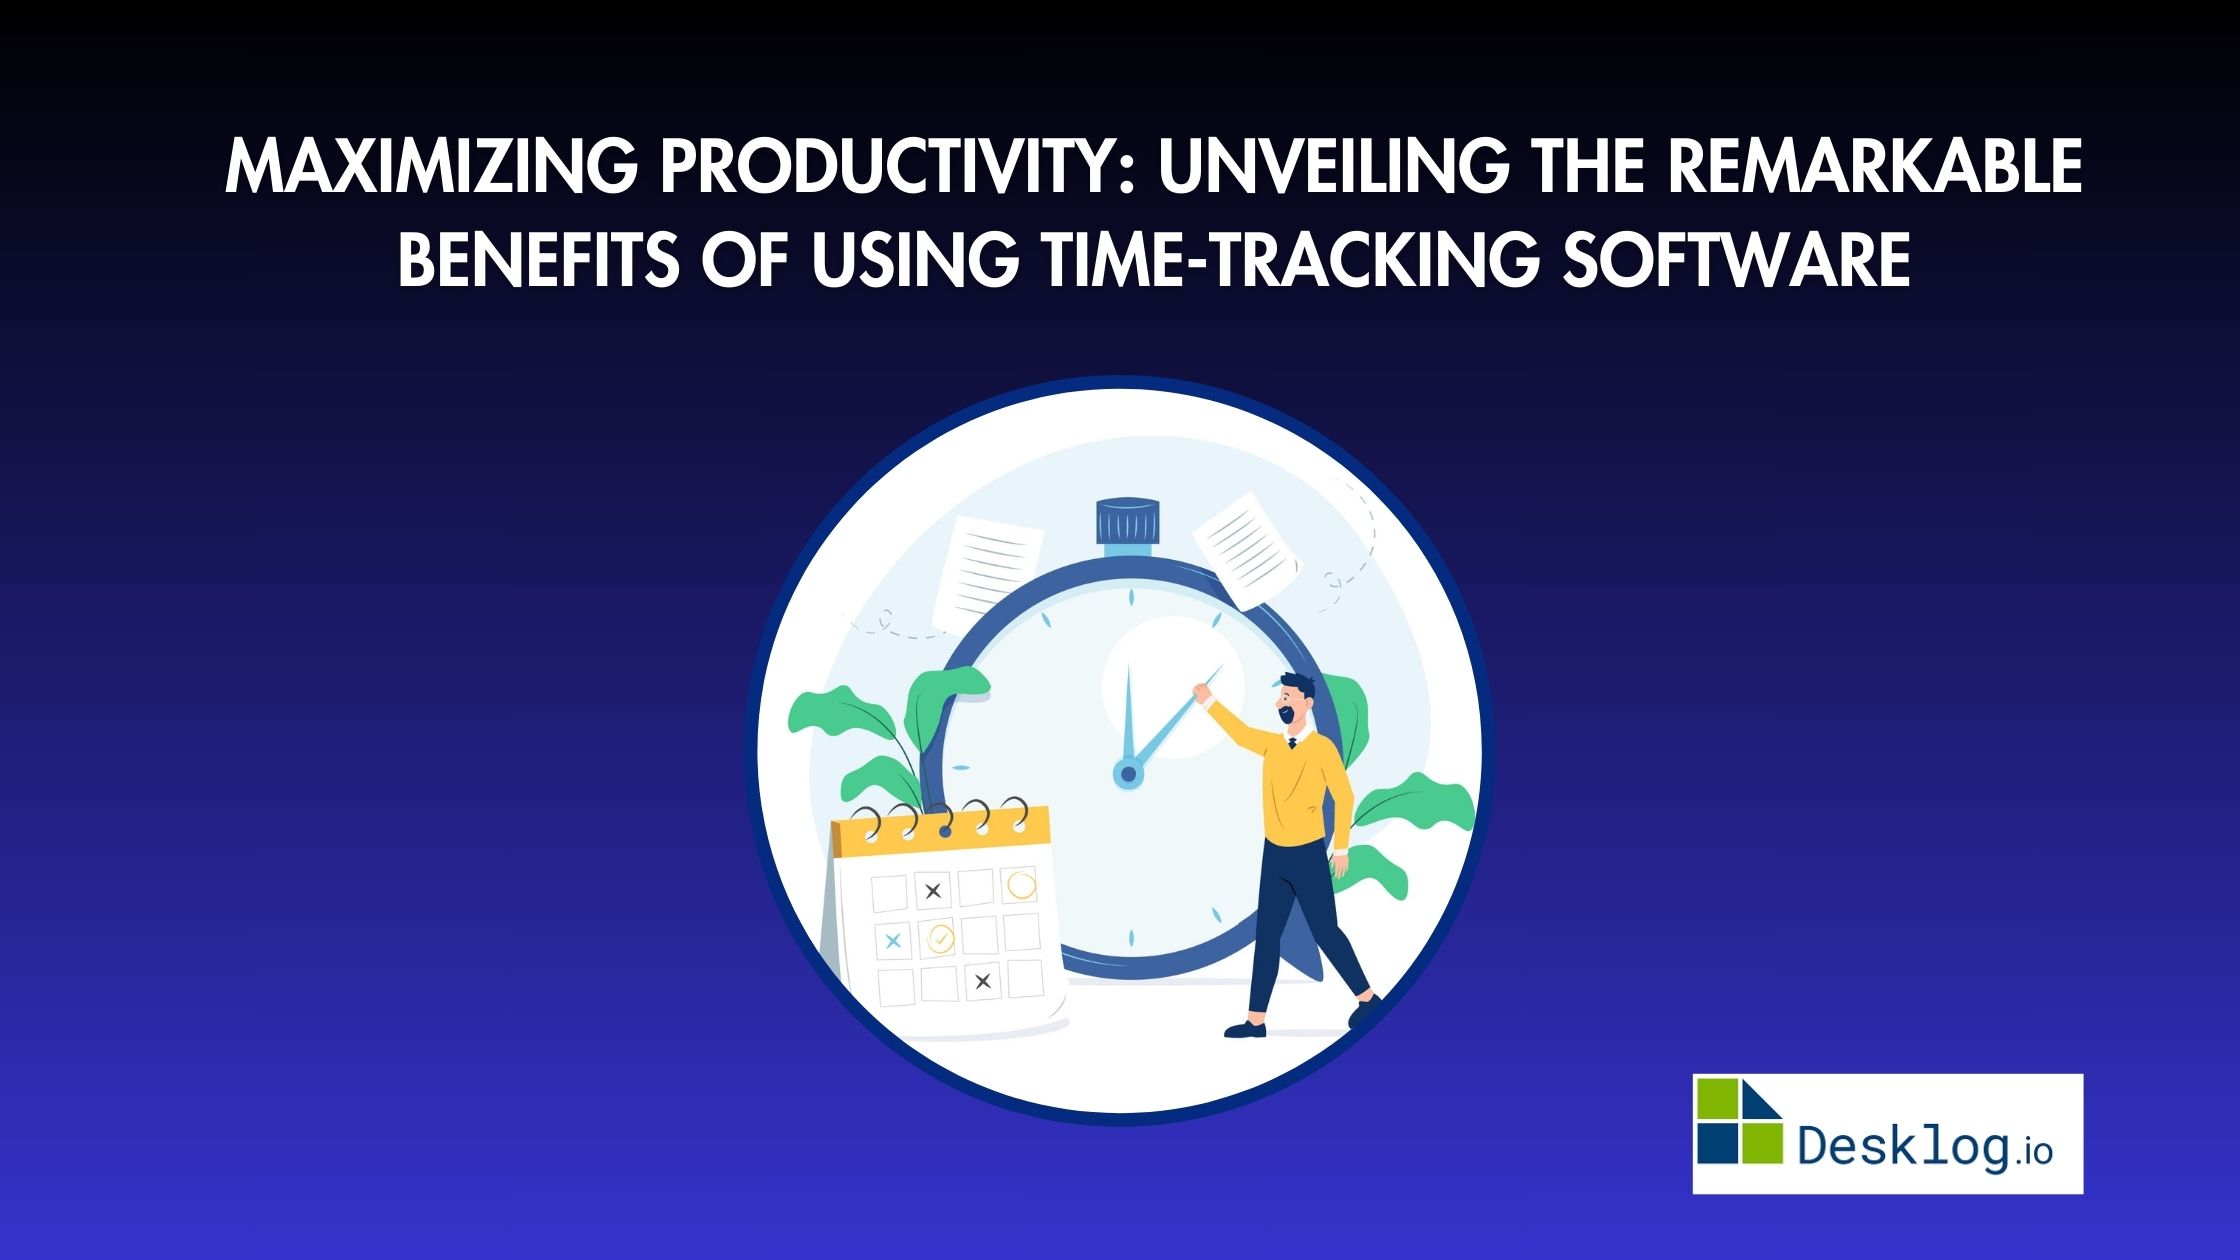 Benefits of Using Time-Tracking Software